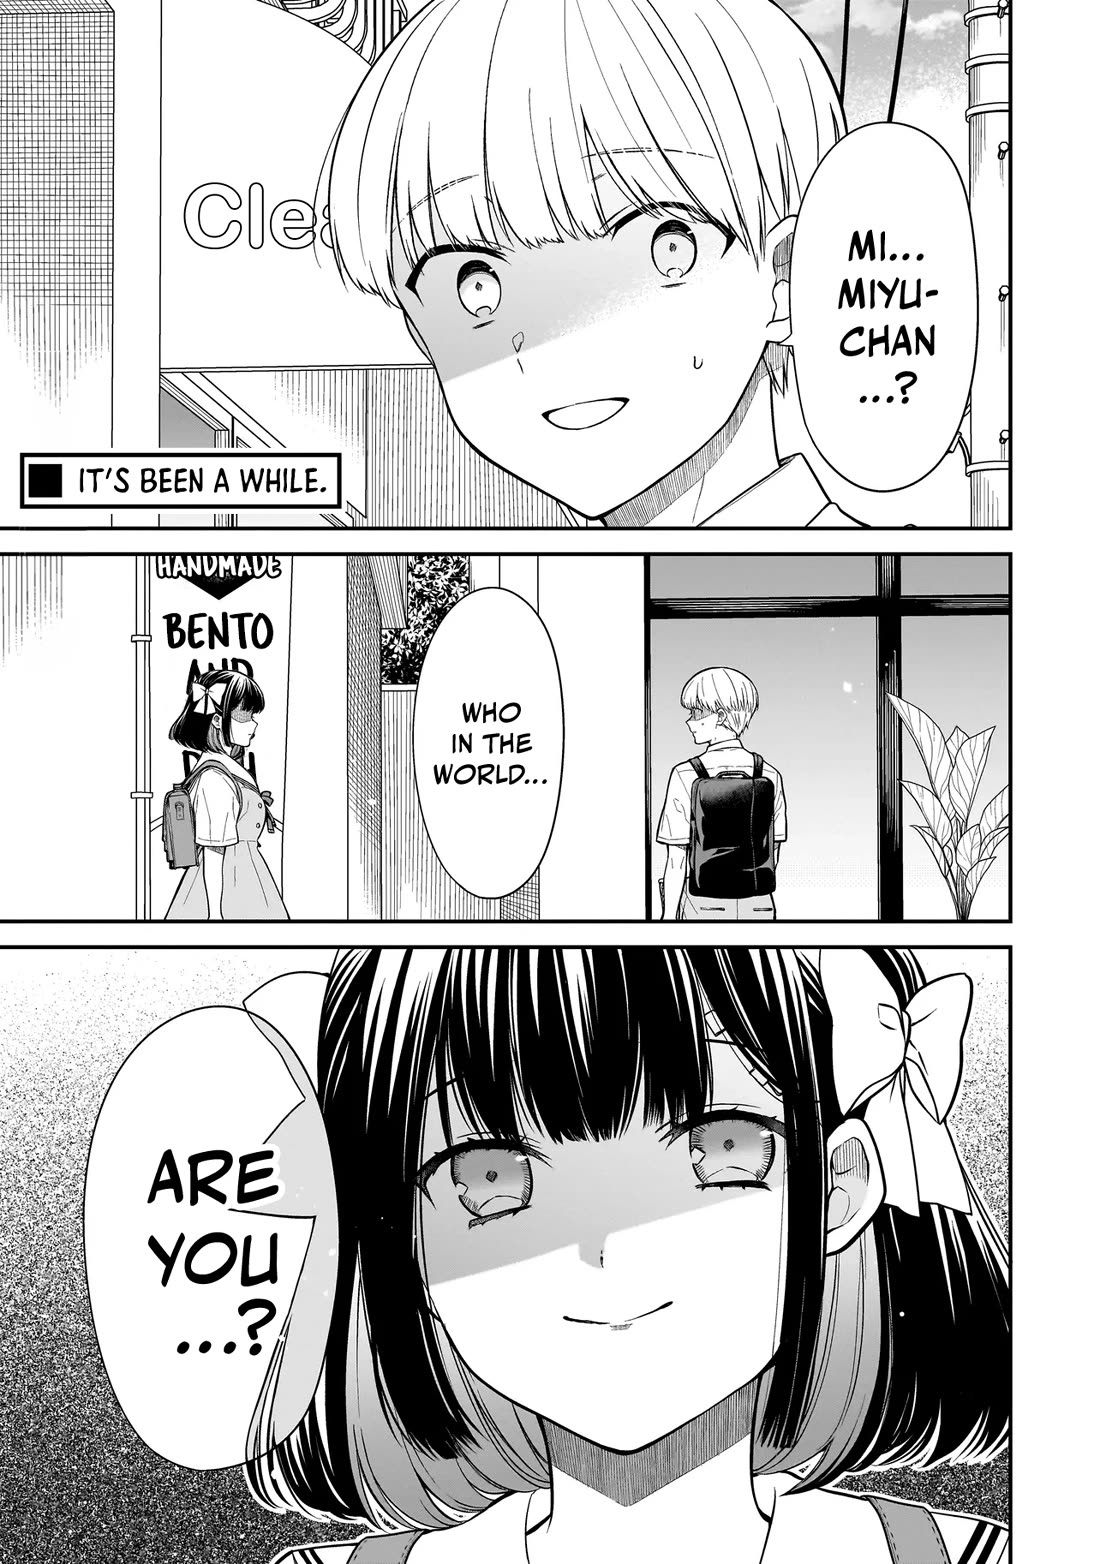 Miyu-chan Will Always Be Your Friend - chapter 2 - #2